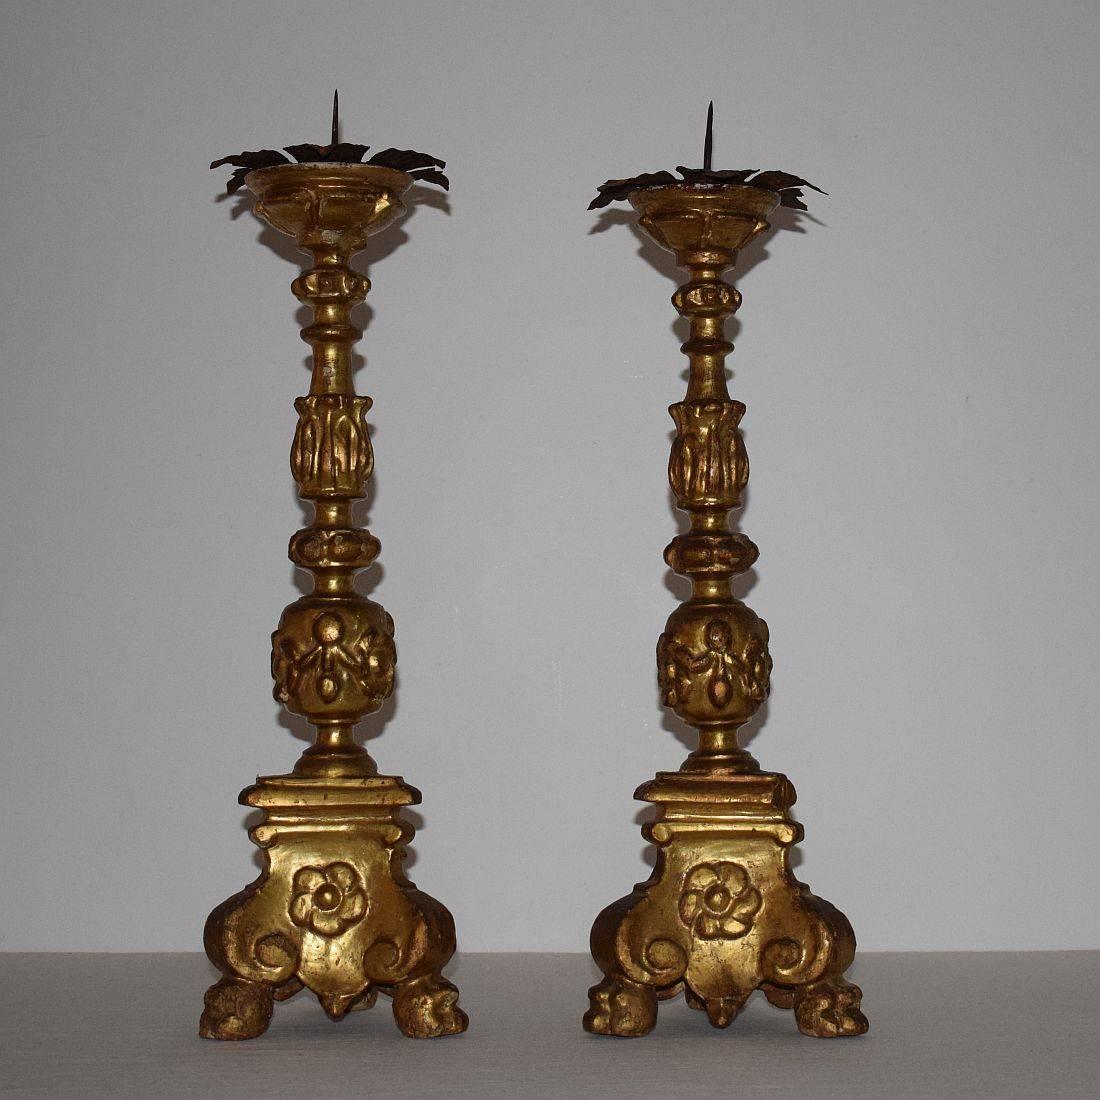 Baroque 17th Century Italian Giltwood Candlesticks With Angels